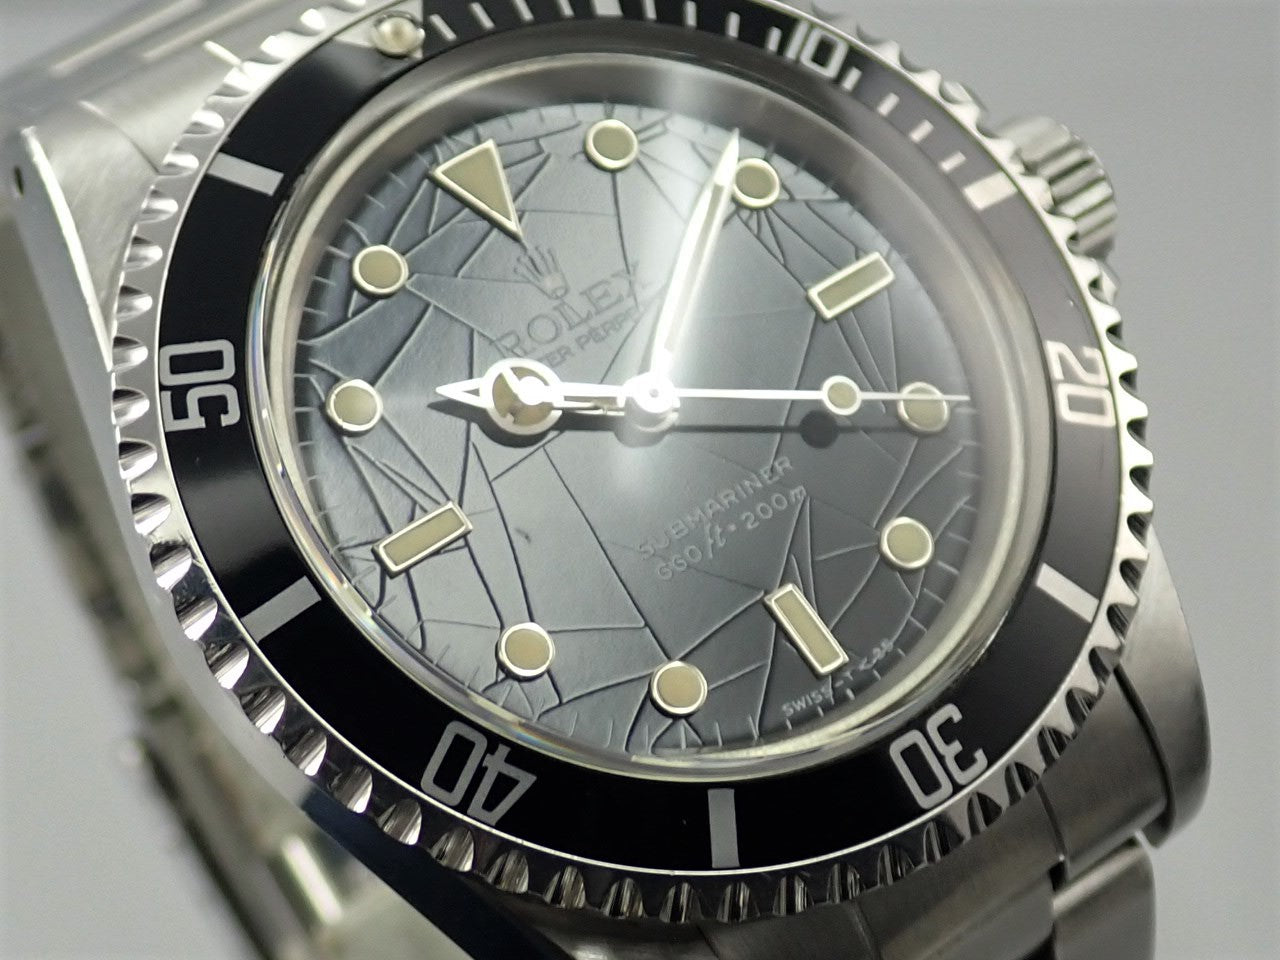 Rolex Submariner &lt;Warranty and Others&gt;